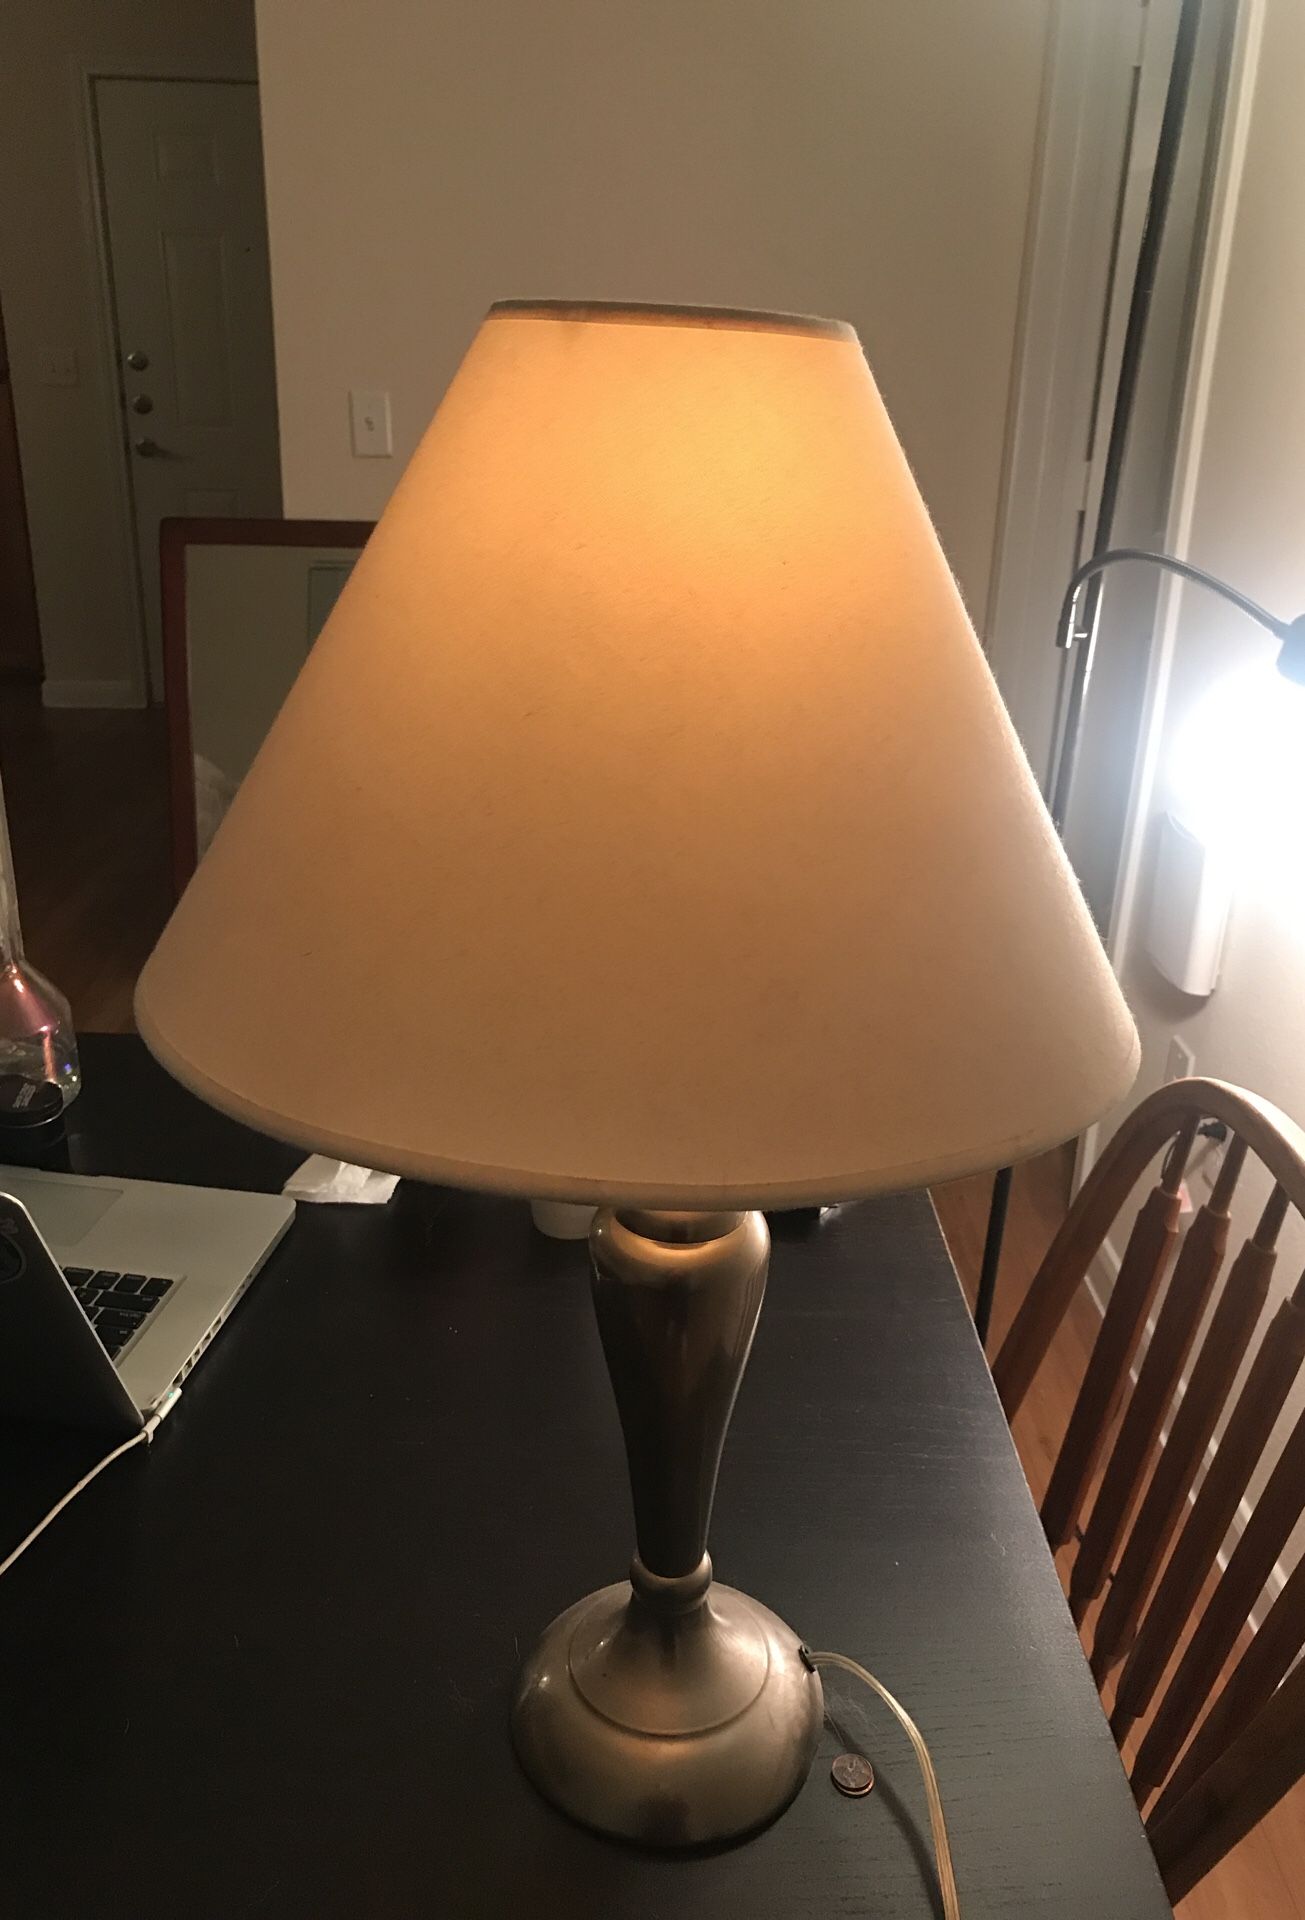 Lamp with 3 shades